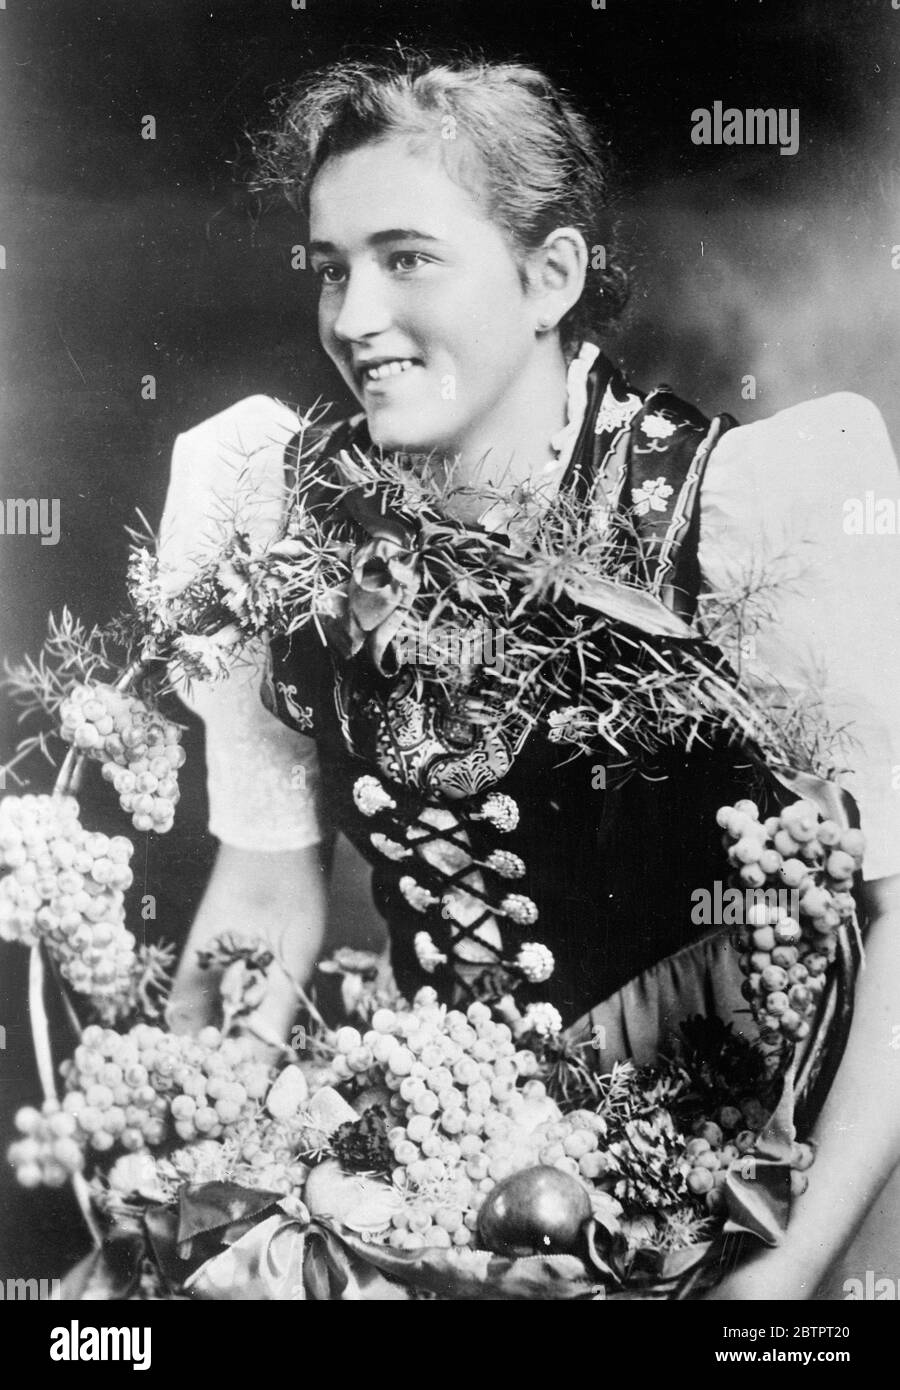 Germany's Wine Queen. Fraulein Gustel Hauptmann, who has been chosen German Wine Queen at the wine harvest festival at Neustadt in the Palatine. Fraulein Hauptmannn comes from the wine village of Haardt near Neustadt. 26 October 1937 Stock Photo